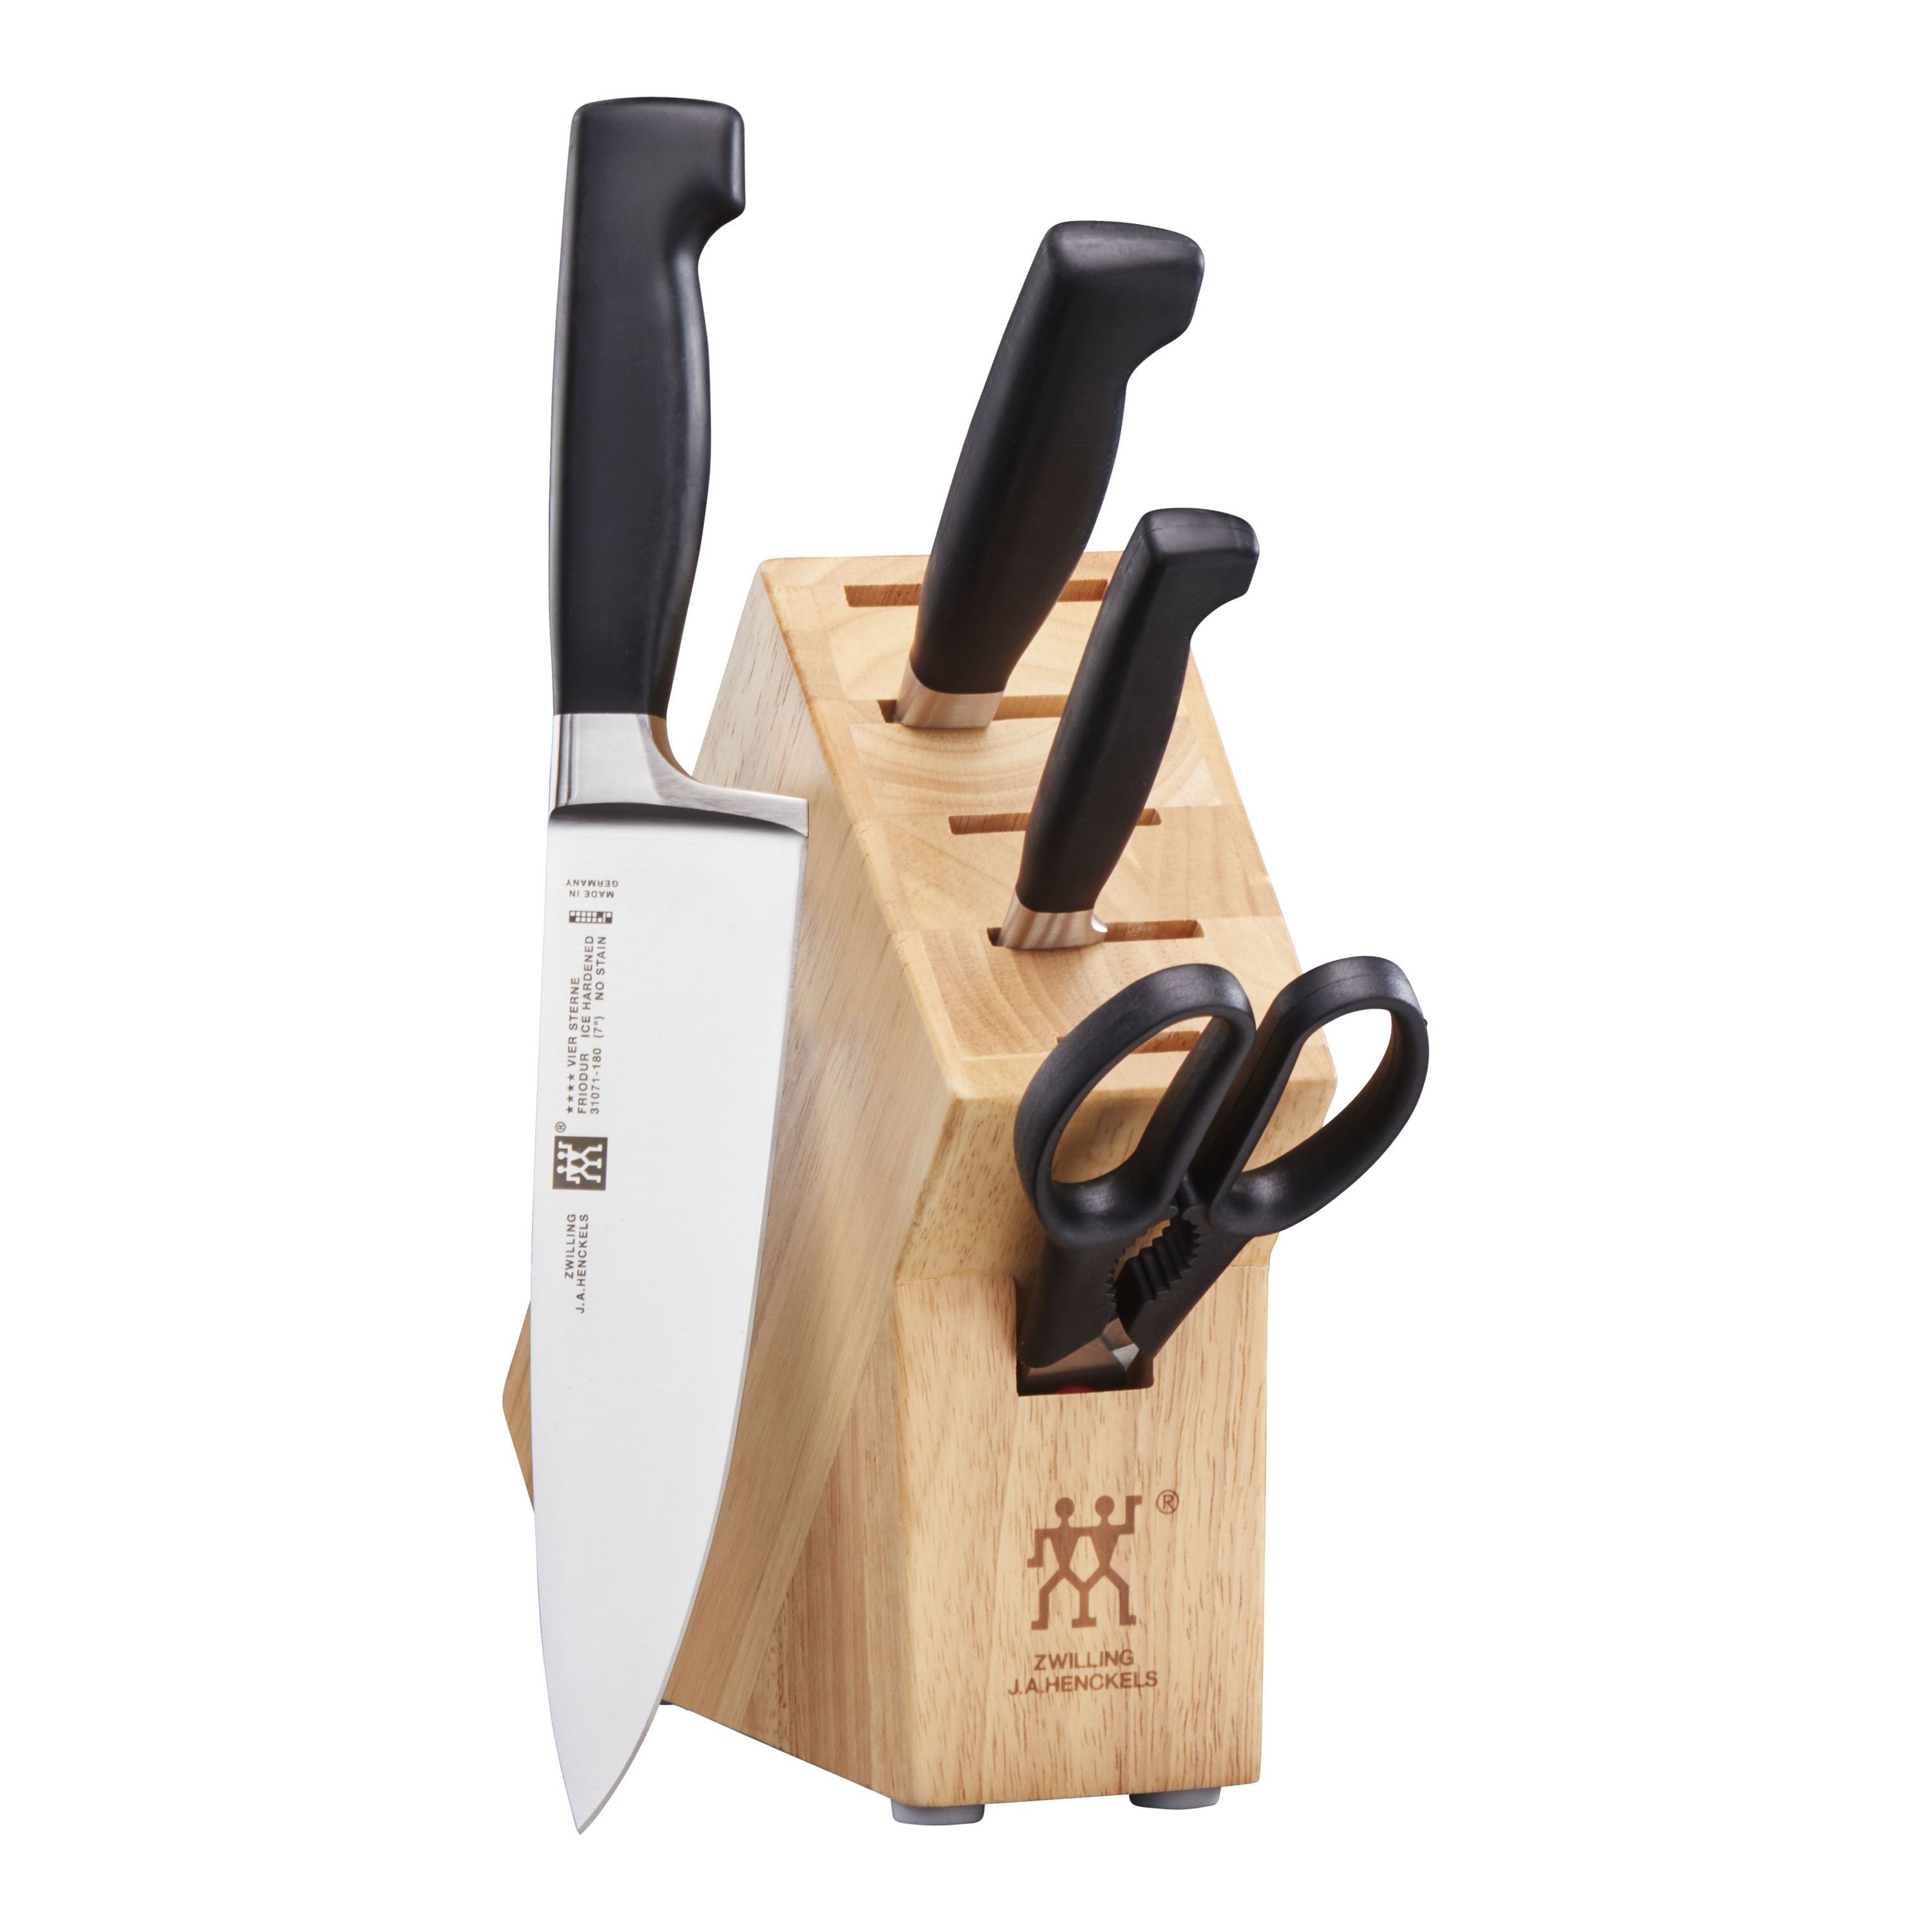 Zwilling ZWILLING J.A. Henckels Four Star 20-pc Knife Block Set - High  Carbon Stainless Steel Blades, Dishwasher Safe, Bamboo Block, Made in  Germany in the Cutlery department at